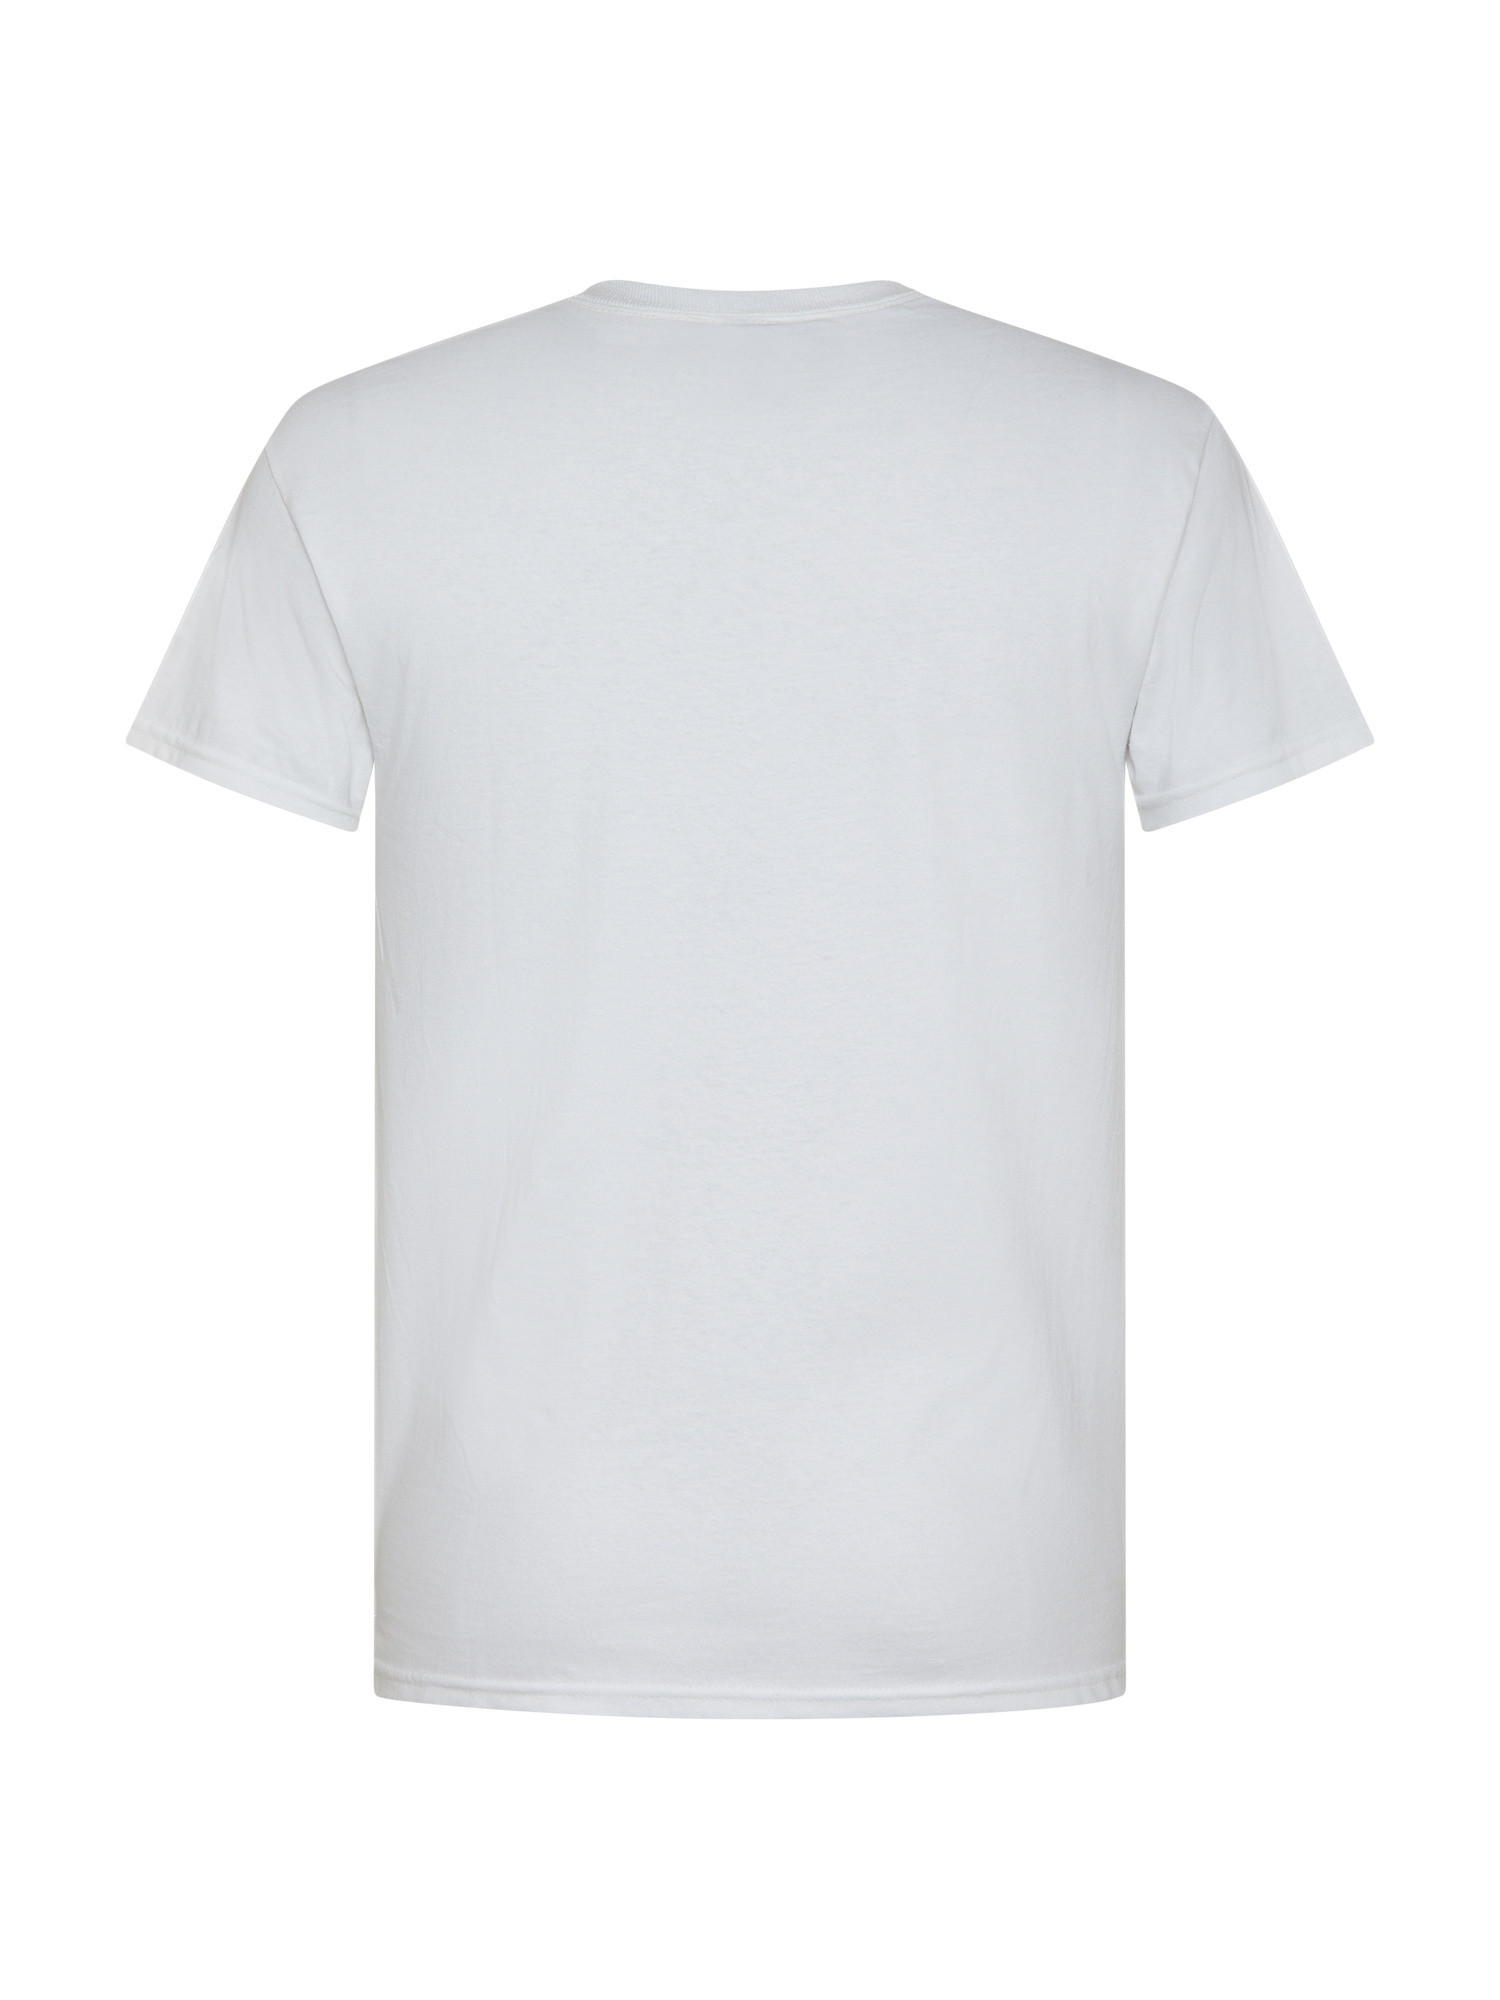 Thrasher - T-Shirt with outlined logo, White, large image number 1